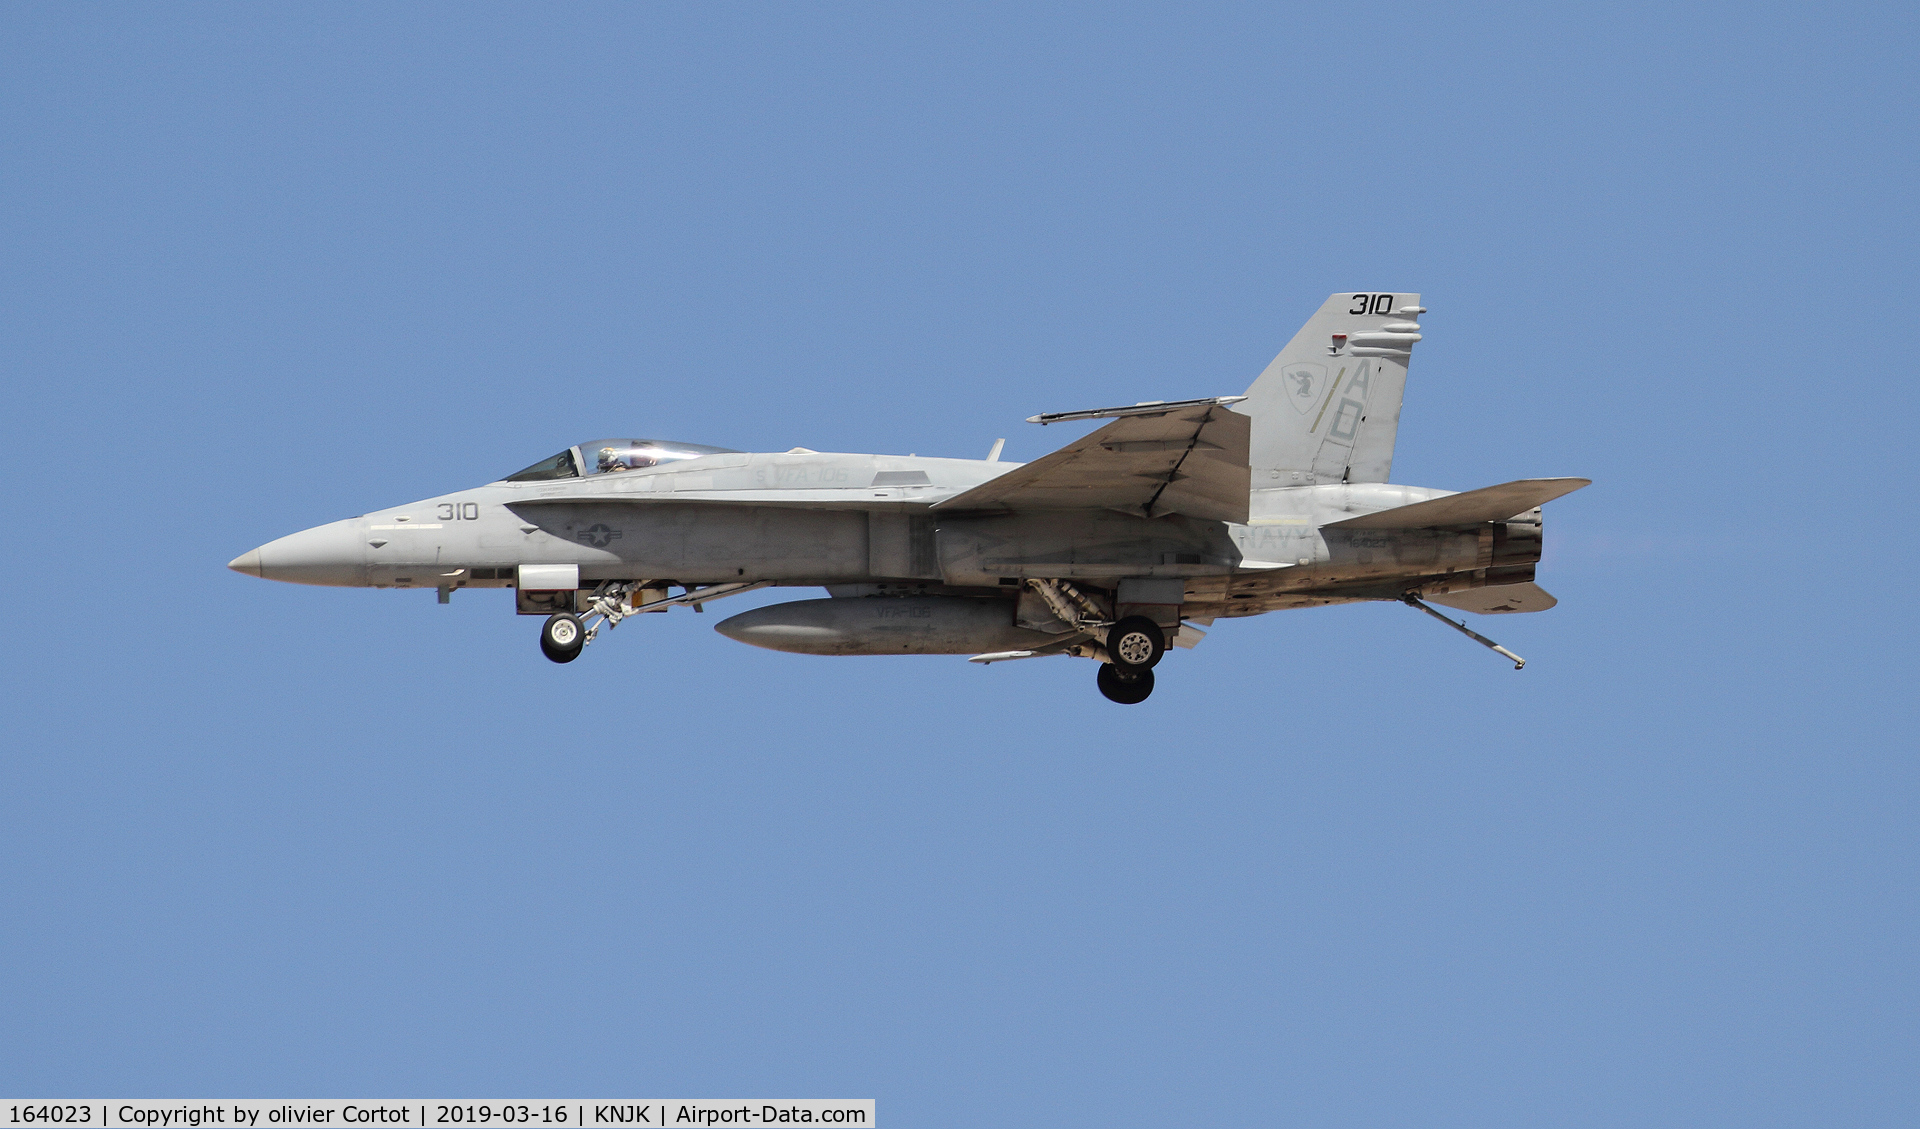 164023, 1990 McDonnell Douglas F/A-18C Hornet C/N 0907/C163, 2019 airshow - maybe the last US Navy legacy hornet display ever...